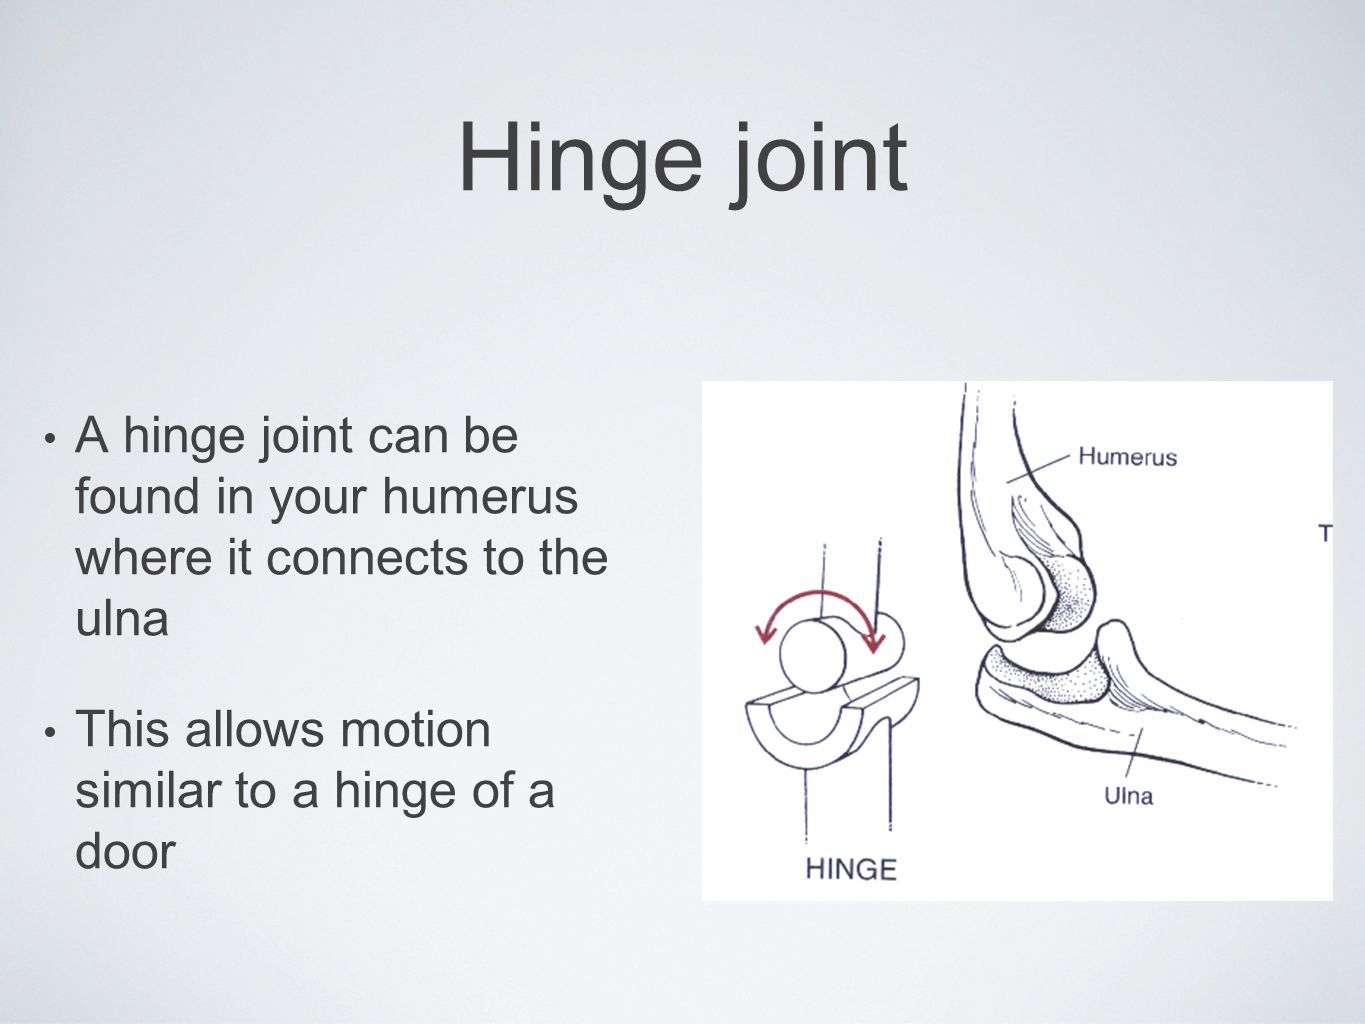 Hinge joint A hinge joint can be found in your humerus where it connects to the ulna.